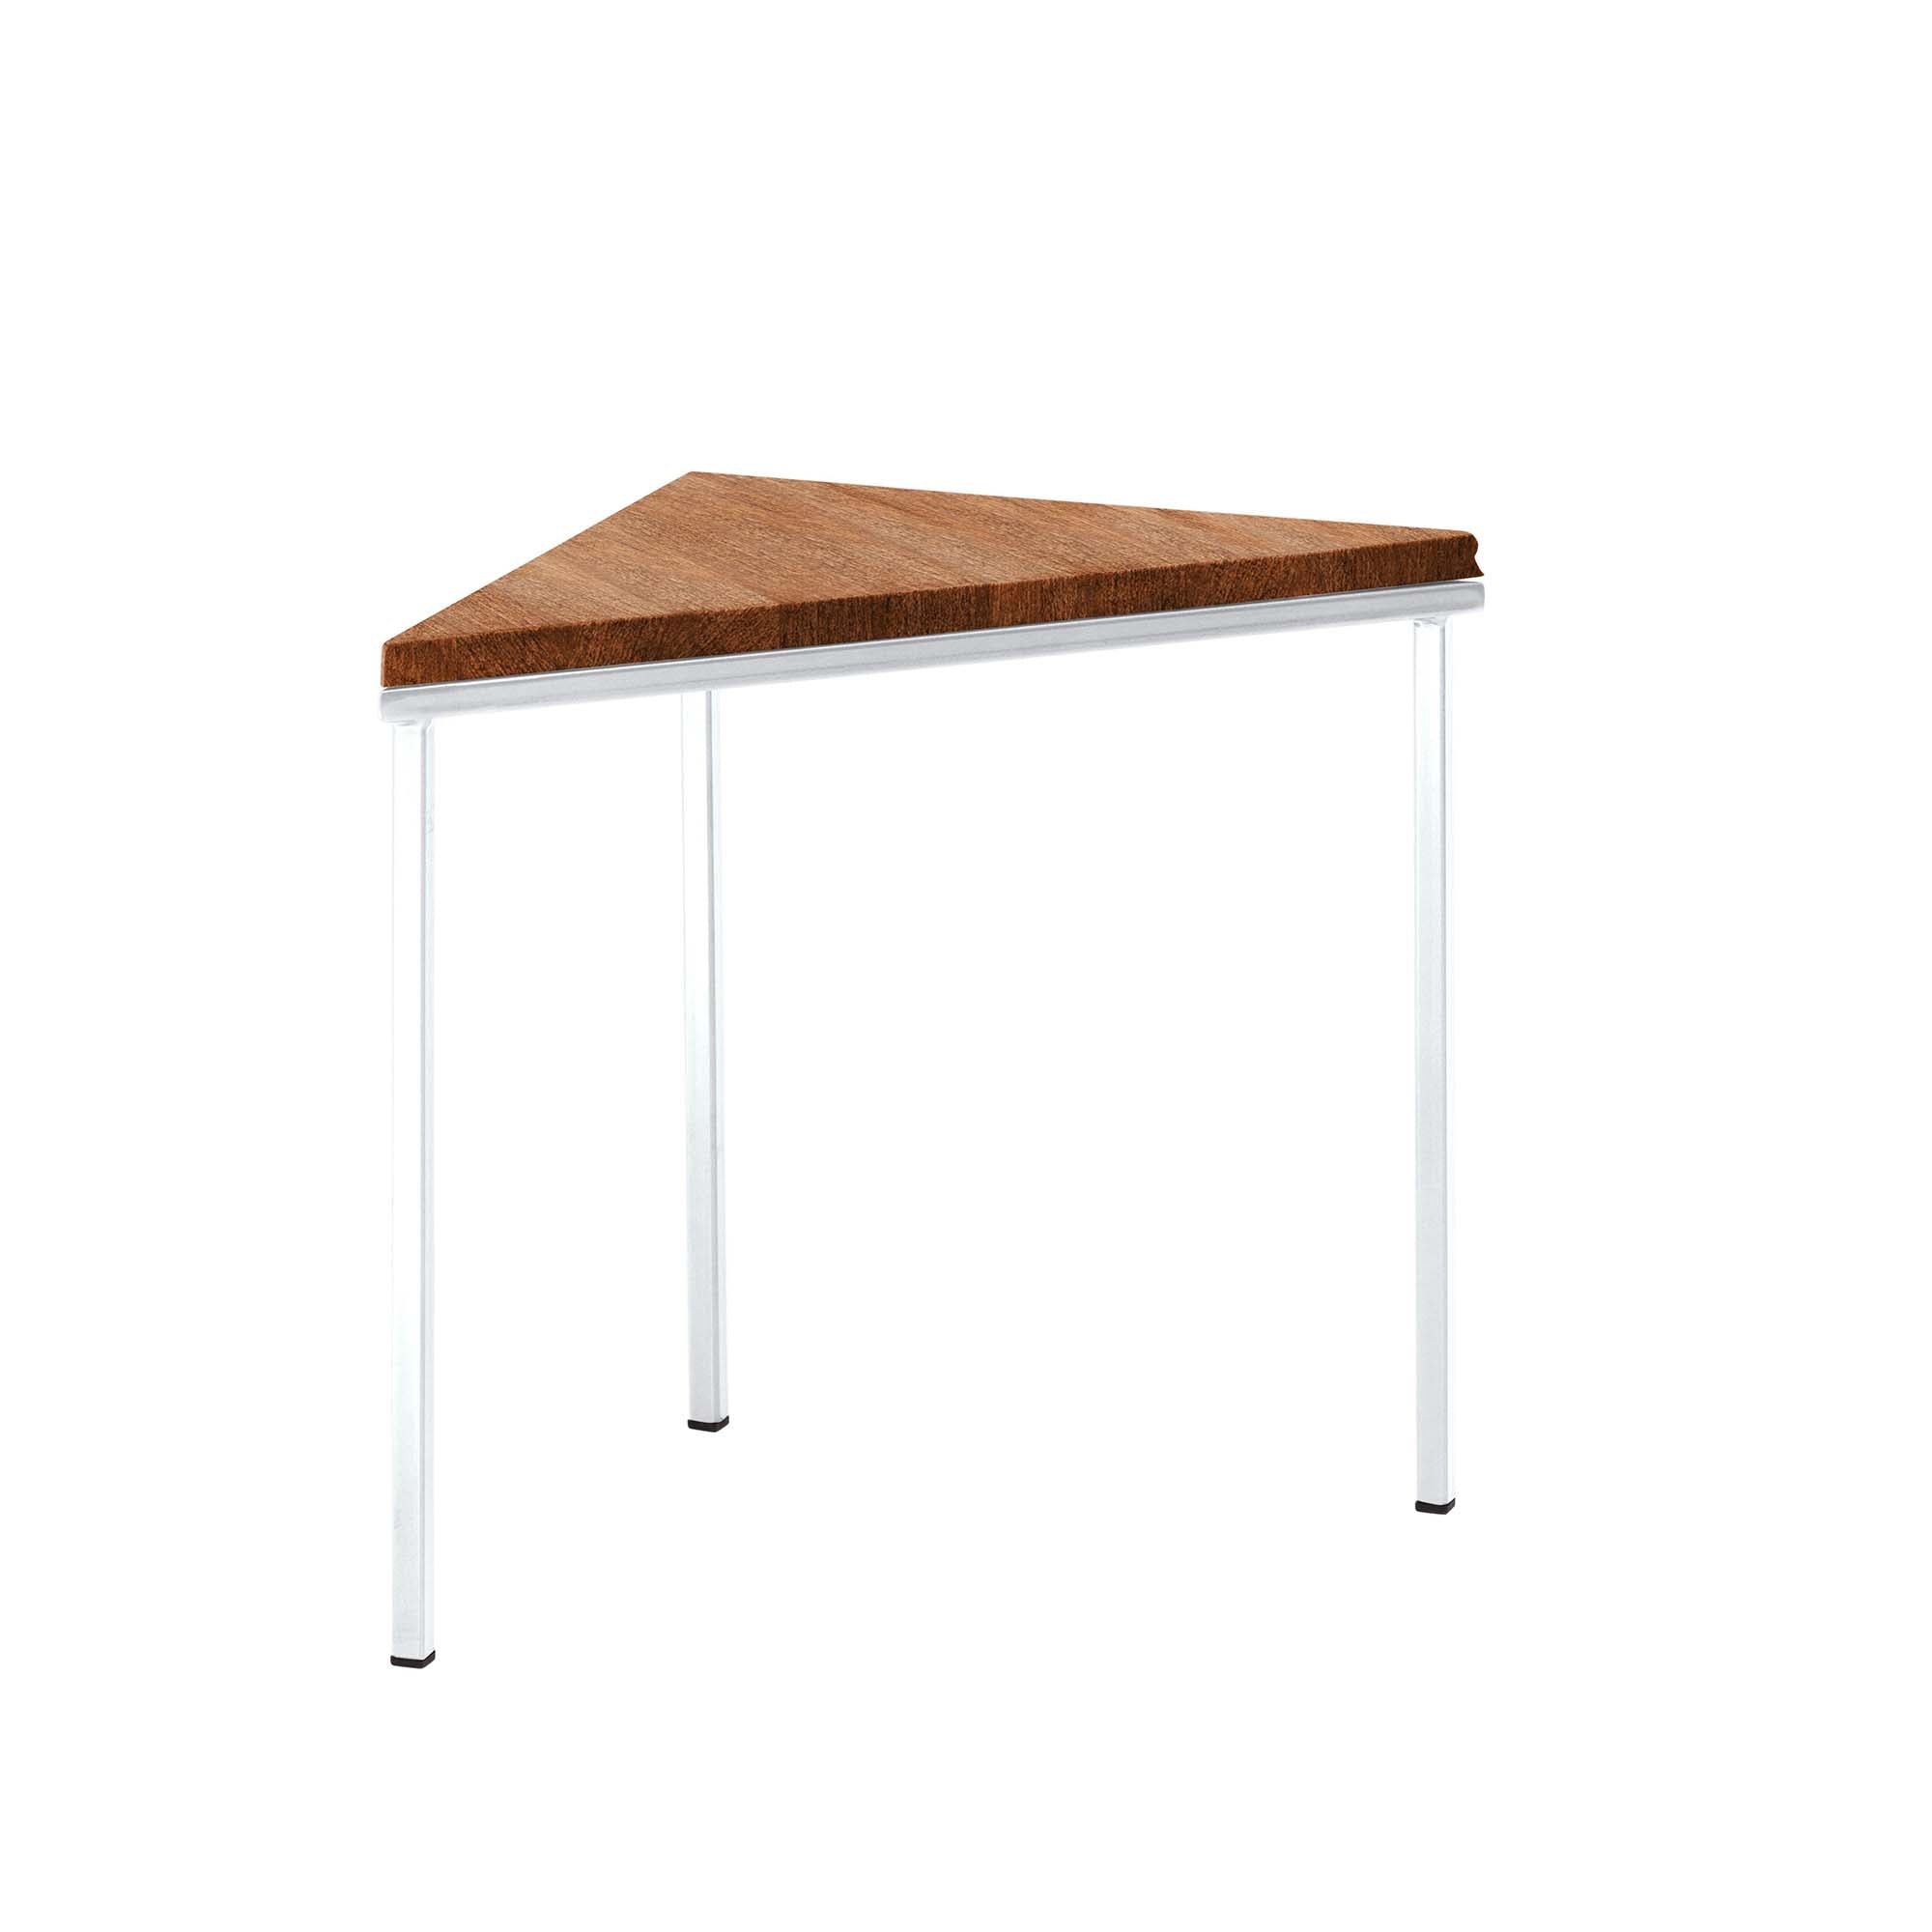 Tripod Table, Beech Wood, Walnut Colour white frame, front view